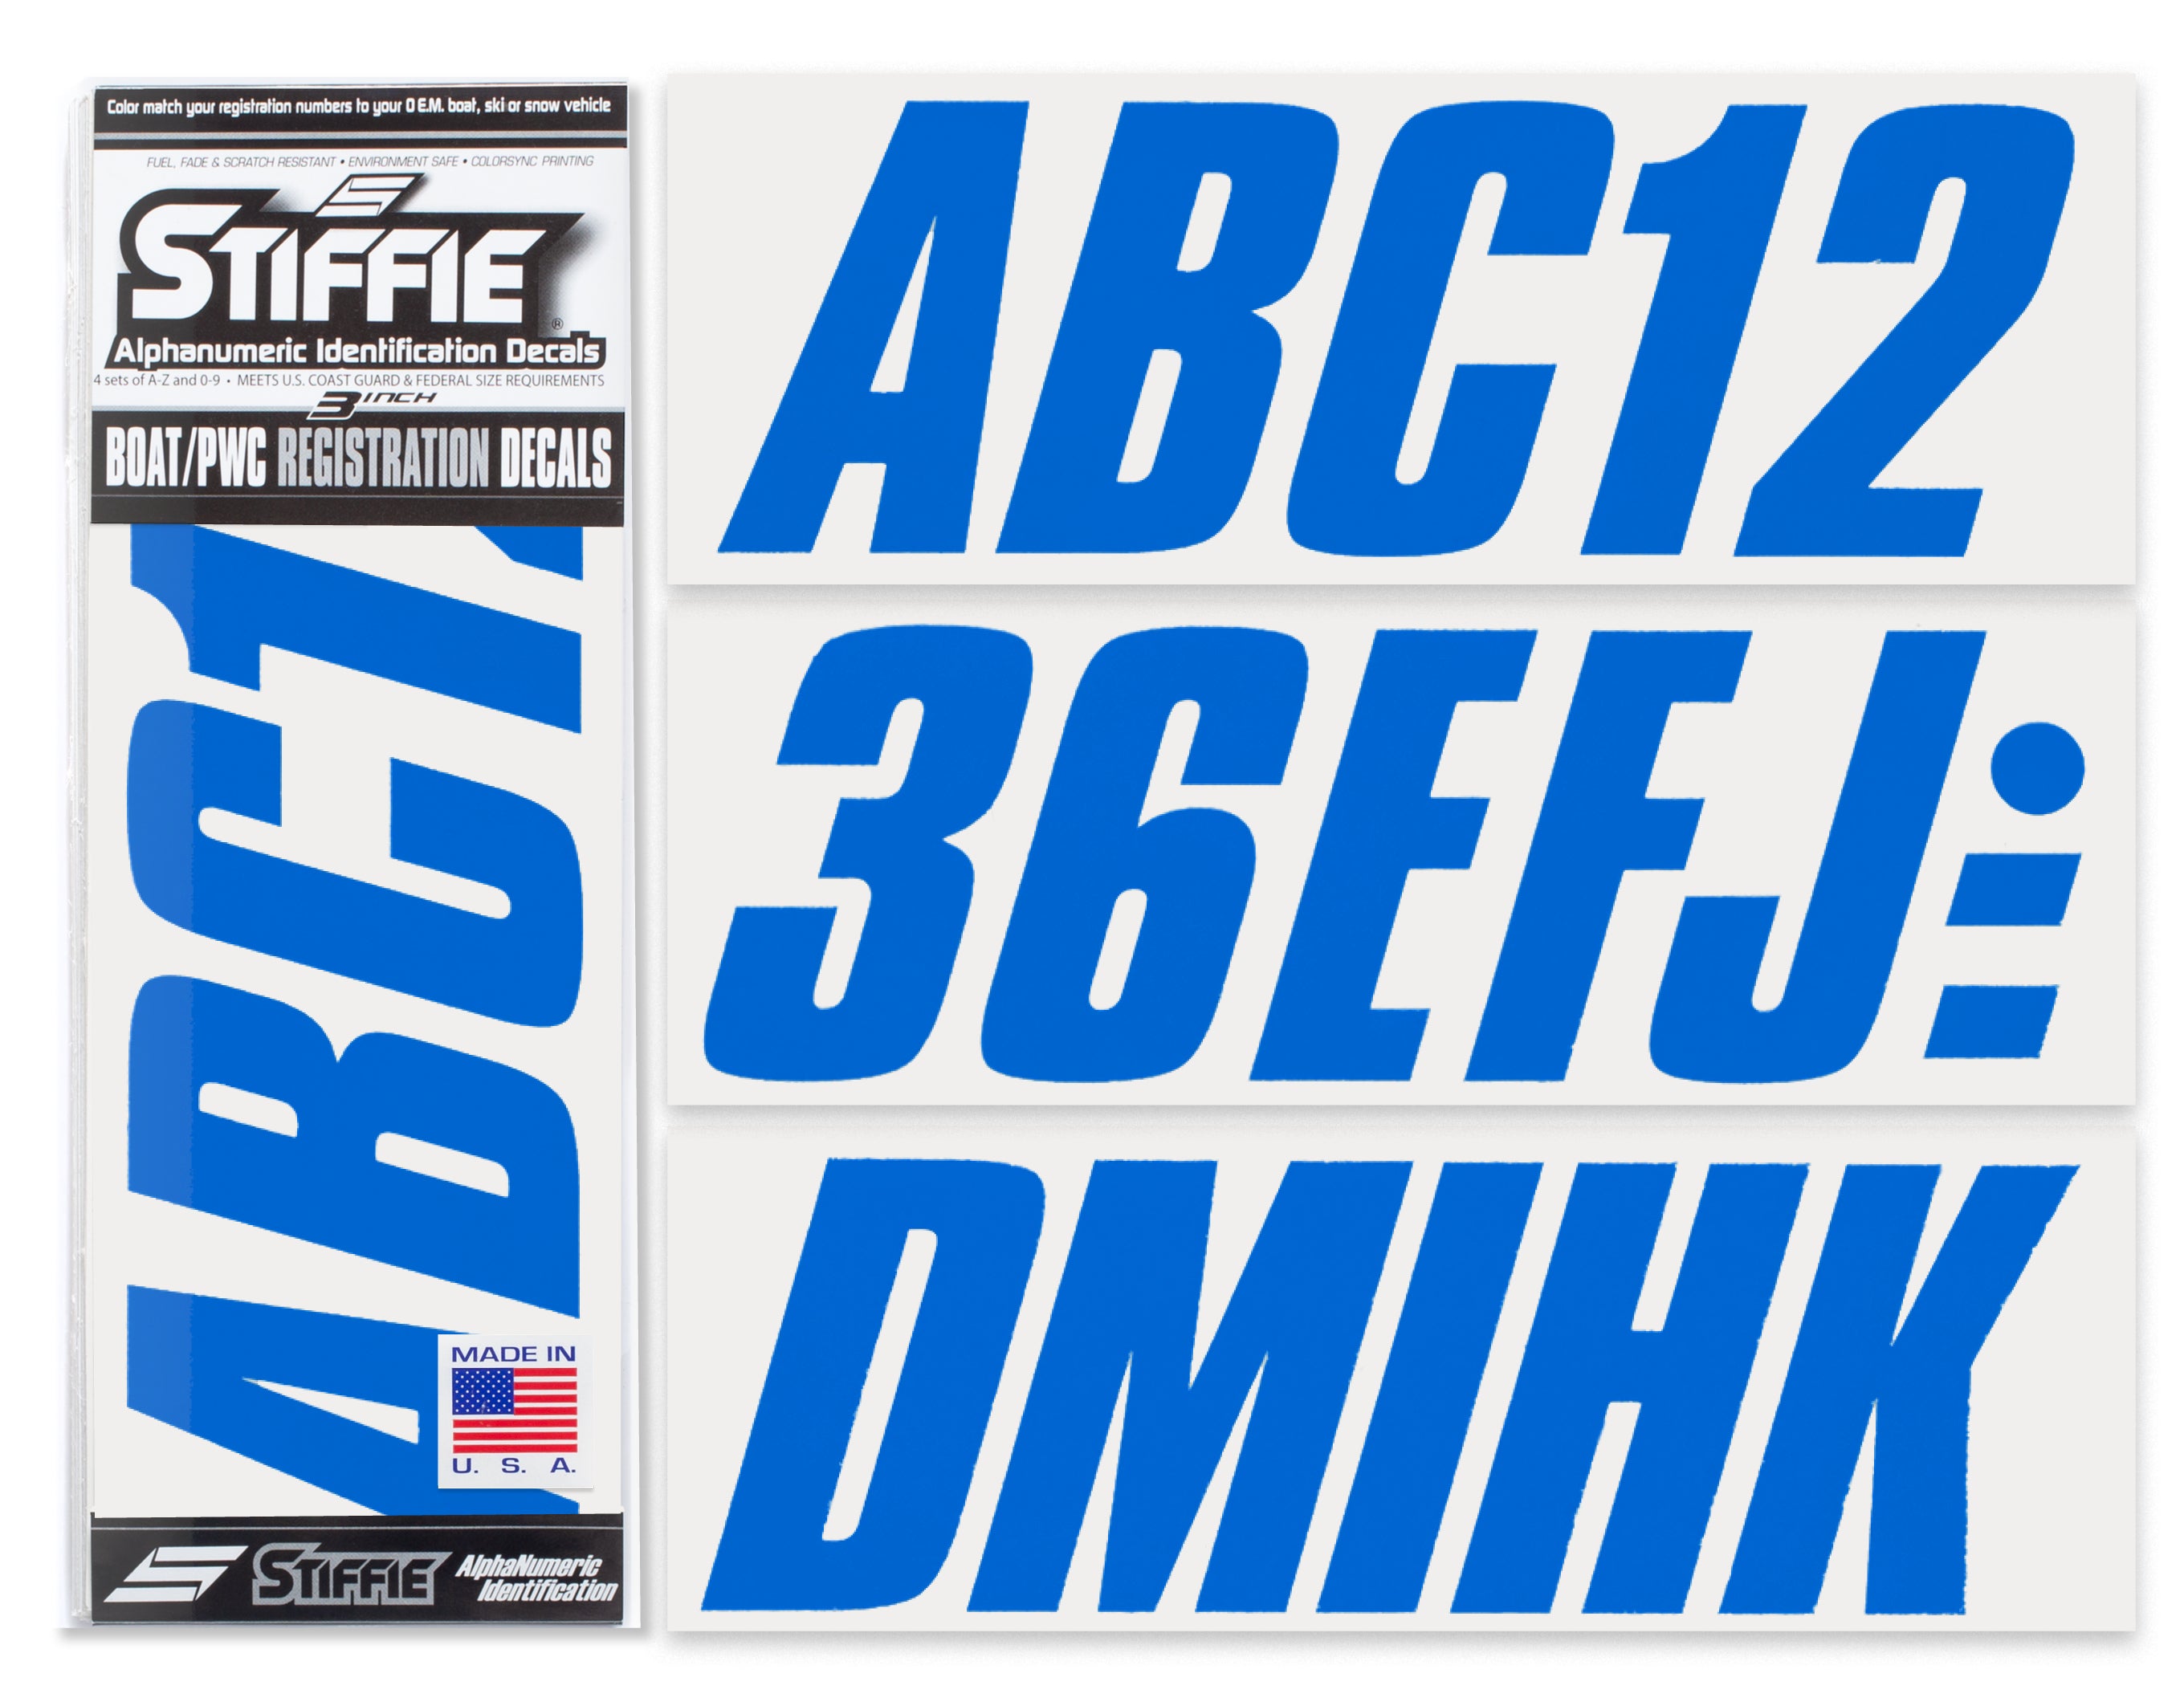 STIFFIE Shift Octane Blue 3" ID Kit Alpha-Numeric Registration Identification Numbers Stickers Decals for Boats & Personal Watercraft